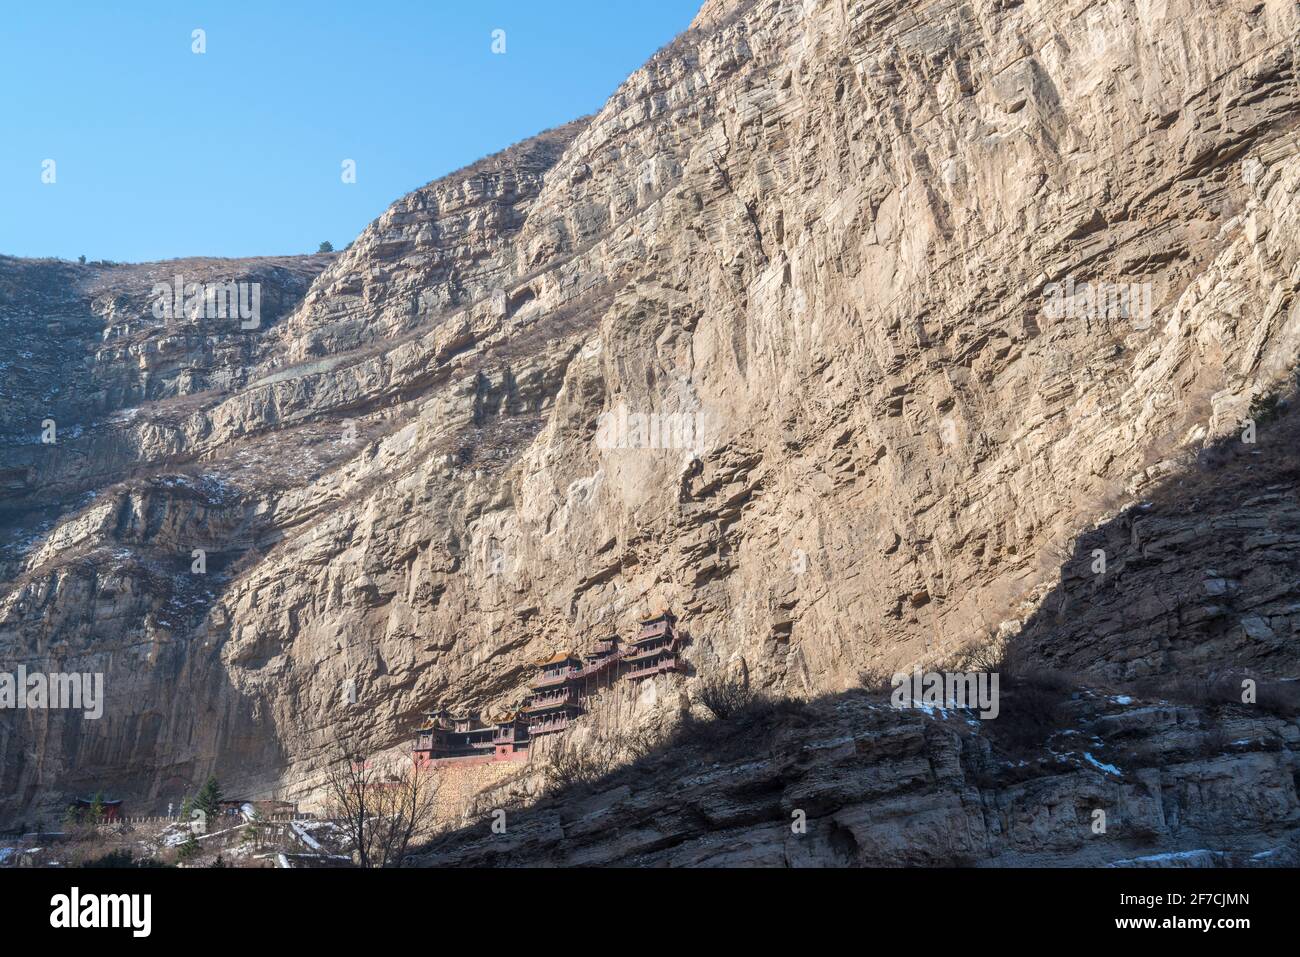 XuanKong Si (Hanging Temple)  at the foot of Hengshan Mountain in Shanxi Province, about 300 miles southwest of Beijing, China. Stock Photo